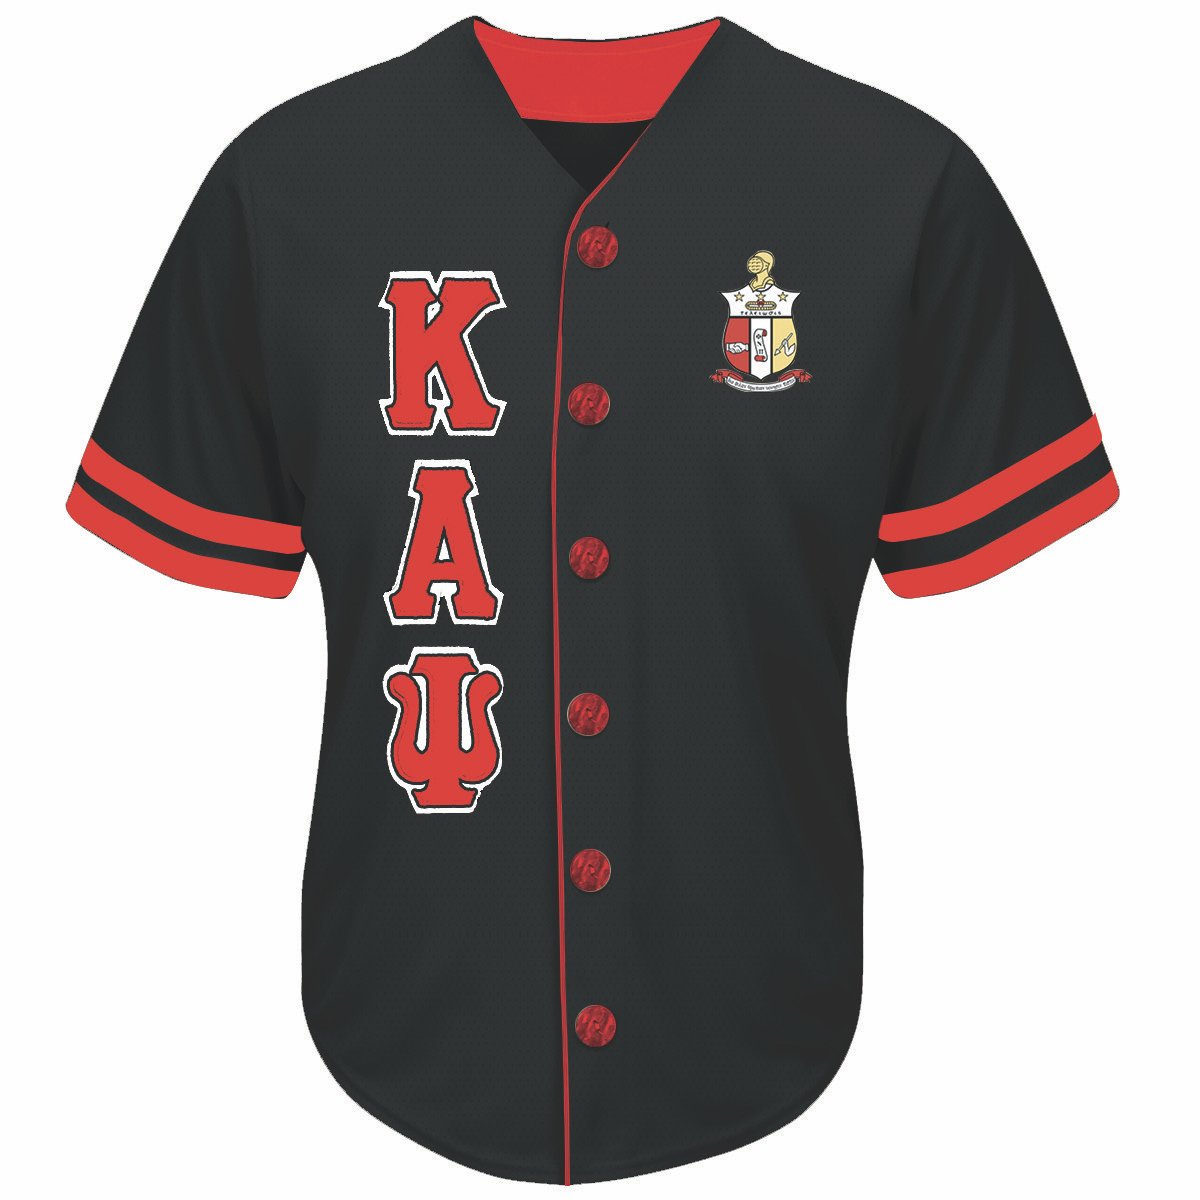 red and black baseball uniforms